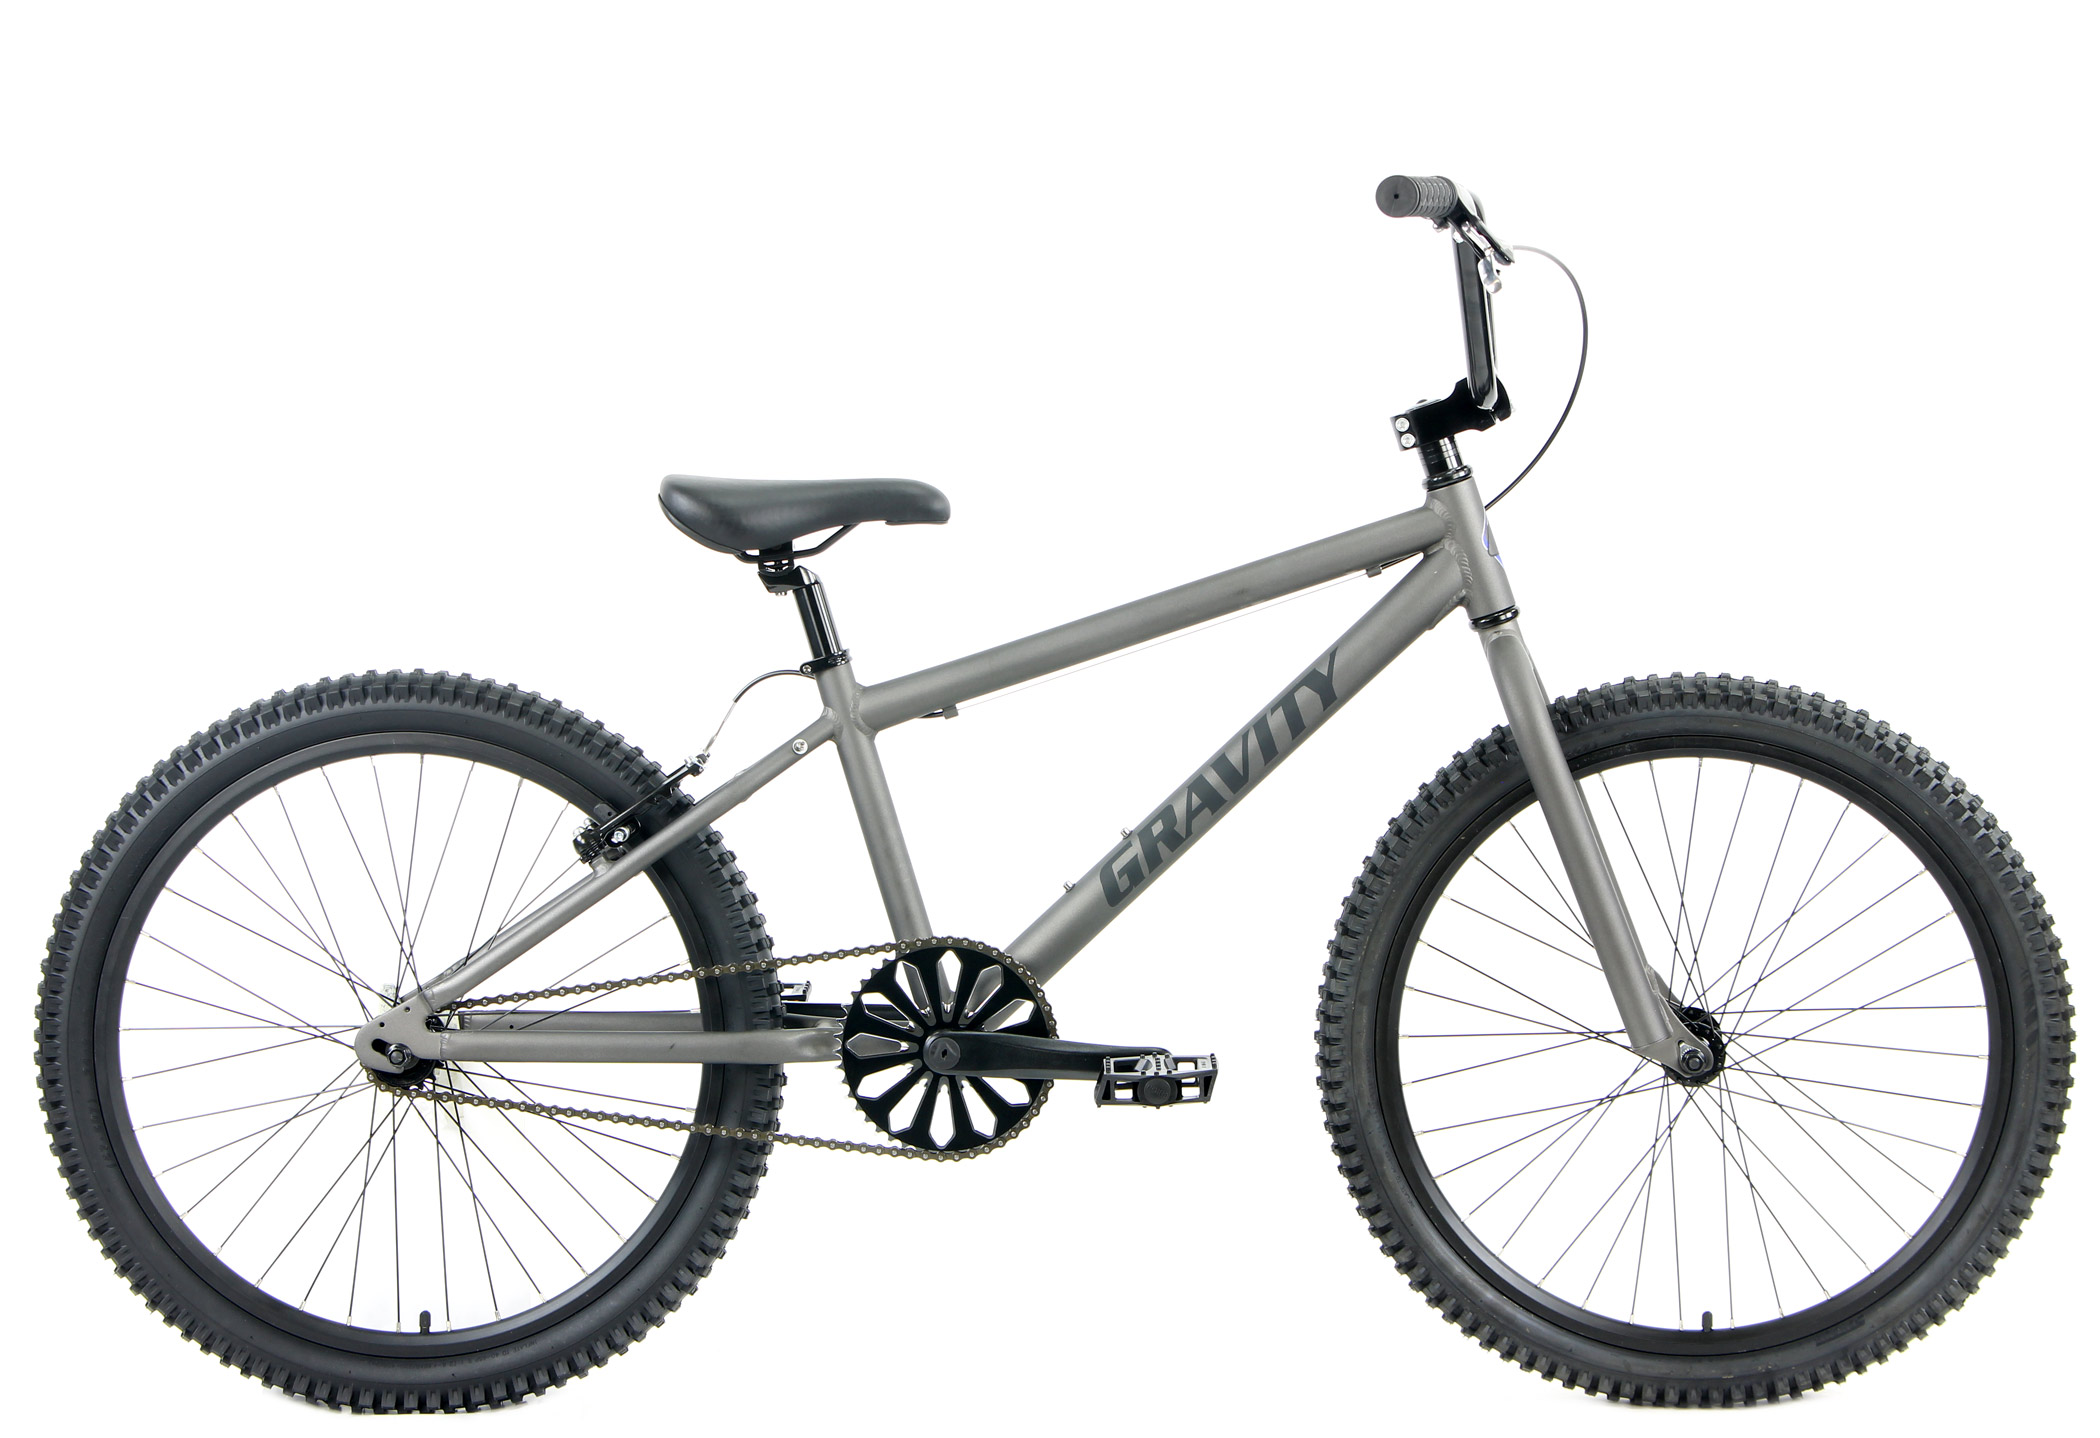 Save up to 60% off new Adult BMX ALL BIKES FREE Ship48US Save Up to 60% Off  Gravity BMX Single Speed BMX Bikes, BMX Cruiser Bikes Fast, Strong and  Lightweight Aluminum Frames